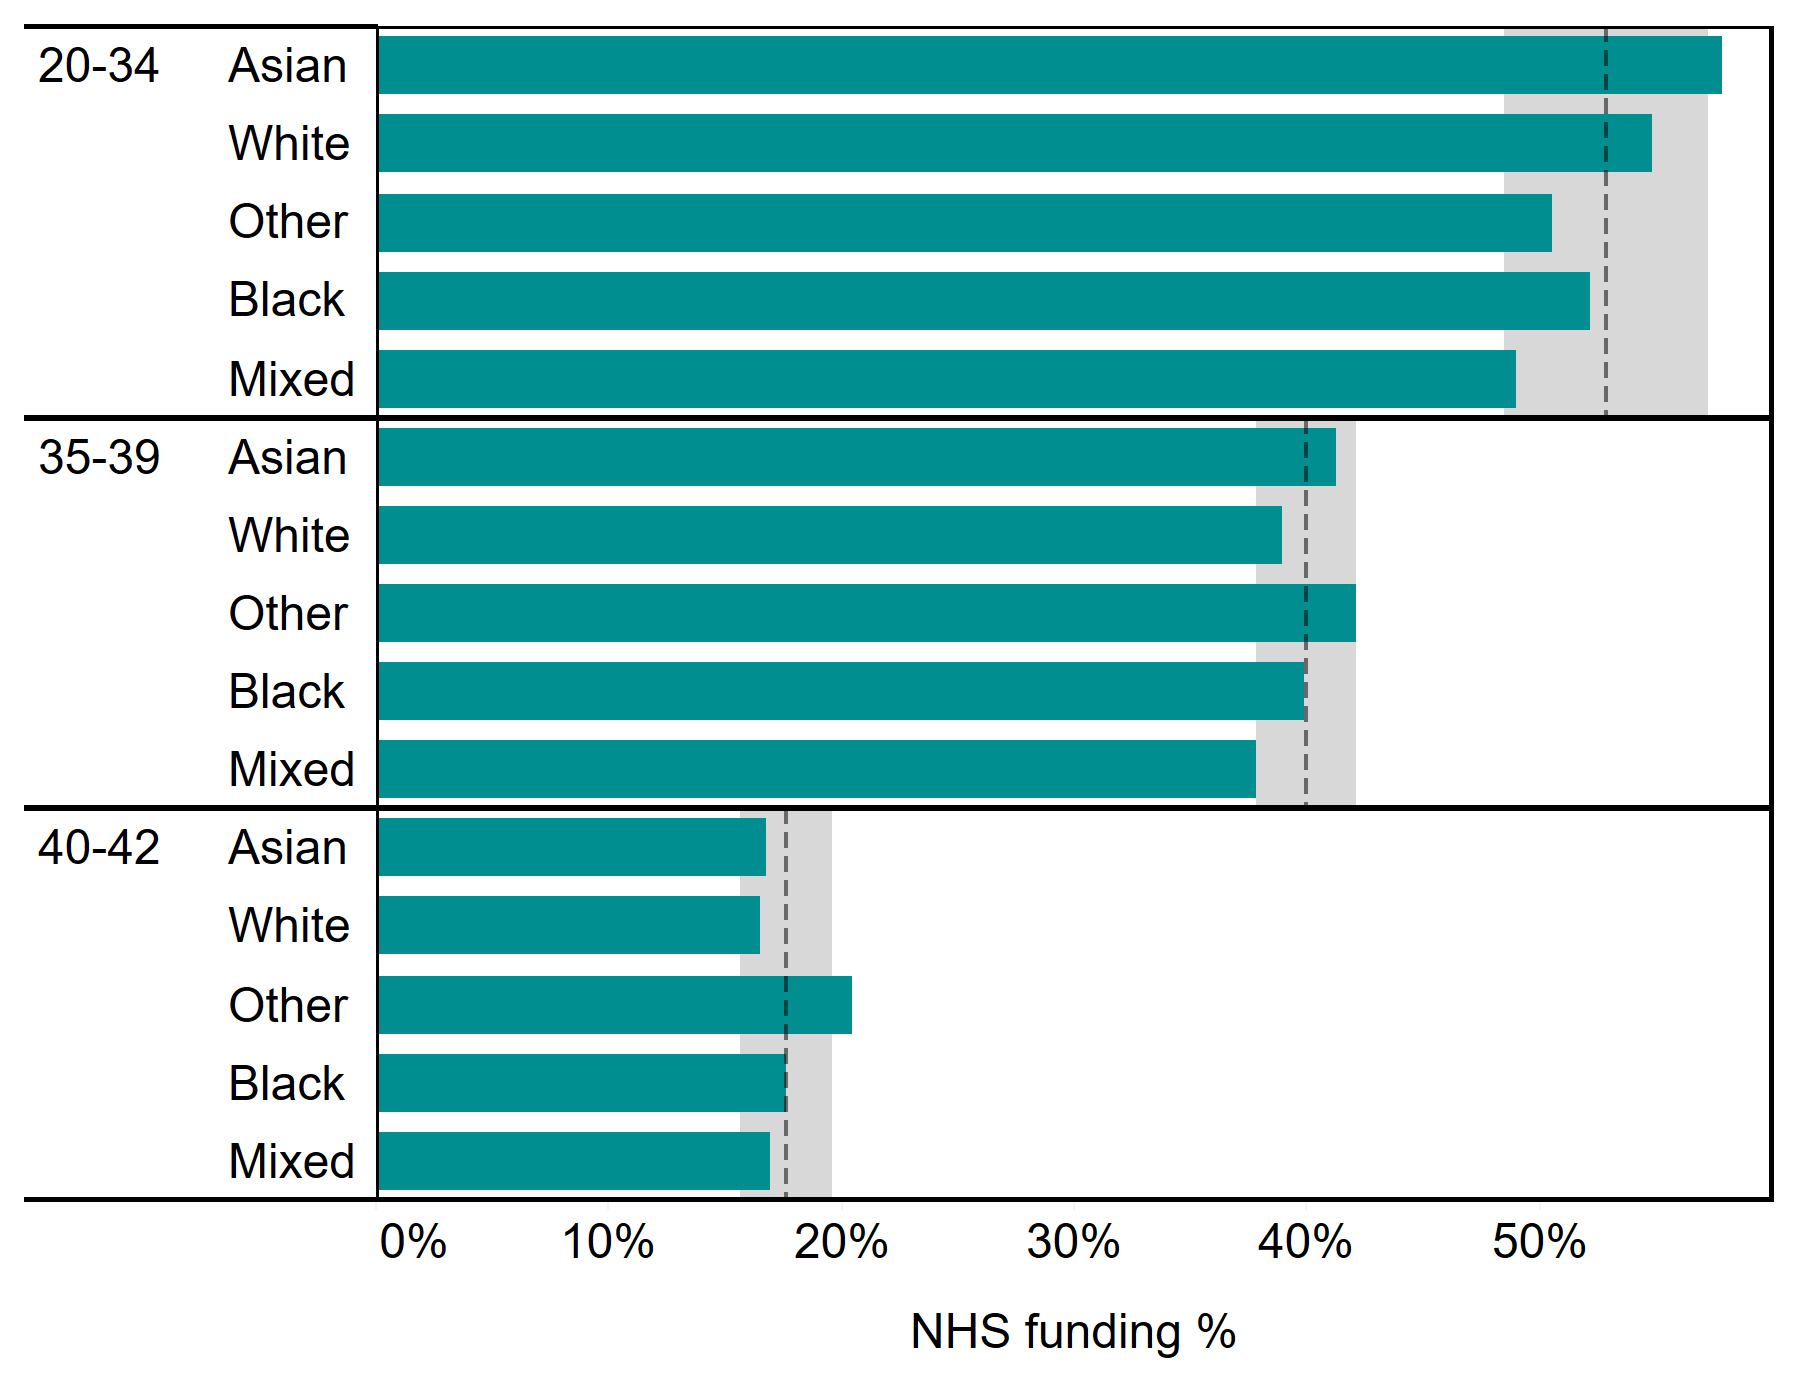 Proportion of IVF cycles funded by NHS, patient age and ethnicity, UK, 2014-2018. The horizontal bar graph shows the percentage of NHS-funded cycles by ethnic group. The graph is further broken down into patient age groups; 20-34, 35-39 and 40-42. For each age group, the average proportion of NHS-funded cycles are shown with a 95% confidence interval. The proportion of NHS-funded cycles decreased with each age bracket. Approximately 50% of IVF cycles were NHS-funded for the 20-34 age group, whereas only 20% were NHS-funded for the 40-42 age group. In the 20-34 age group, Asian and White patients had more NHS-funded cycles than average for the age group. For the 35-39 age group, Asian and Other patients had more NHS-funded cycles than average. For the 40-42 age group, Other and Black patients had more NHS-funded cycles than average.